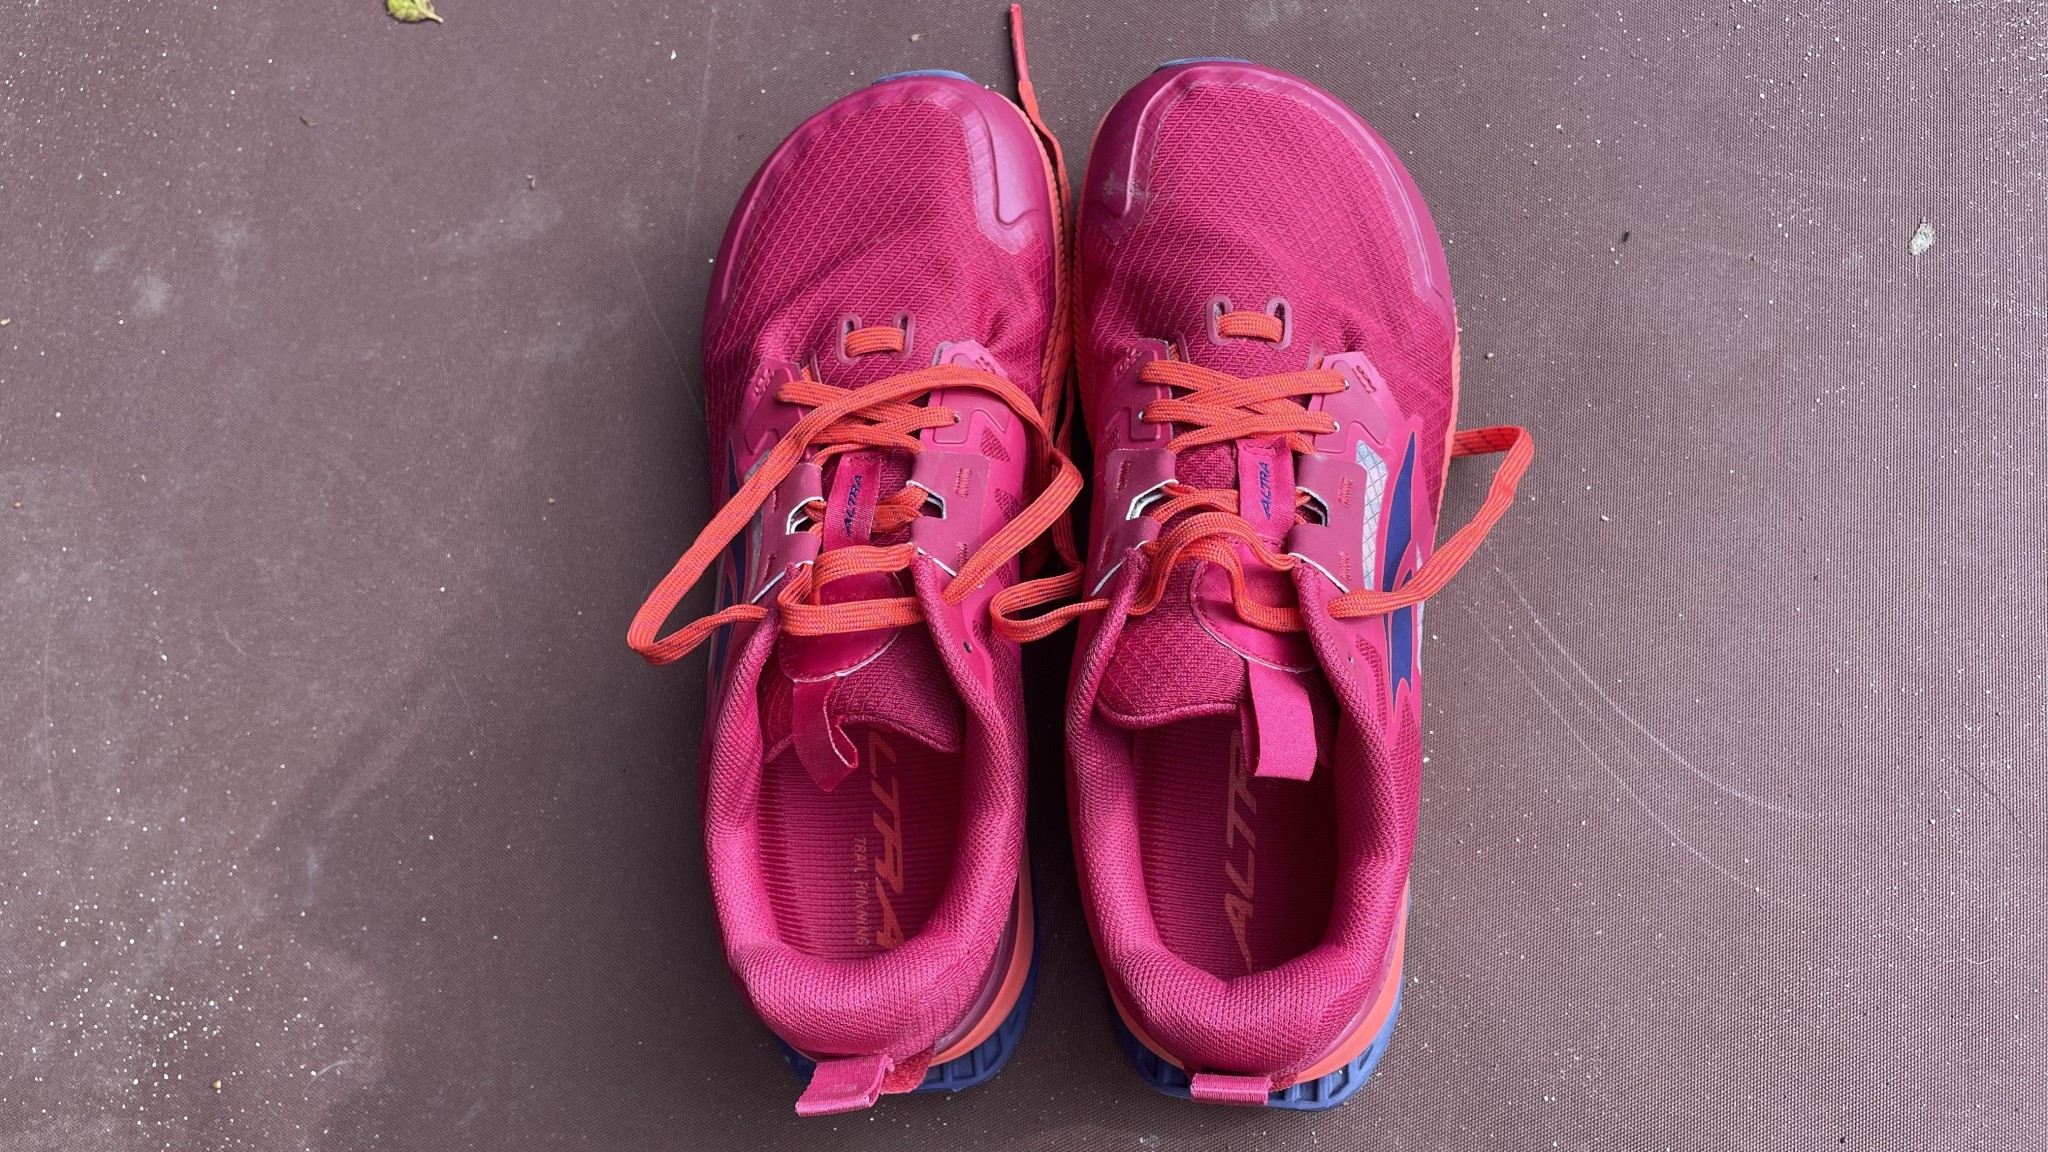 Altra Lone Peak 7 - Women's Review | Tested & Rated